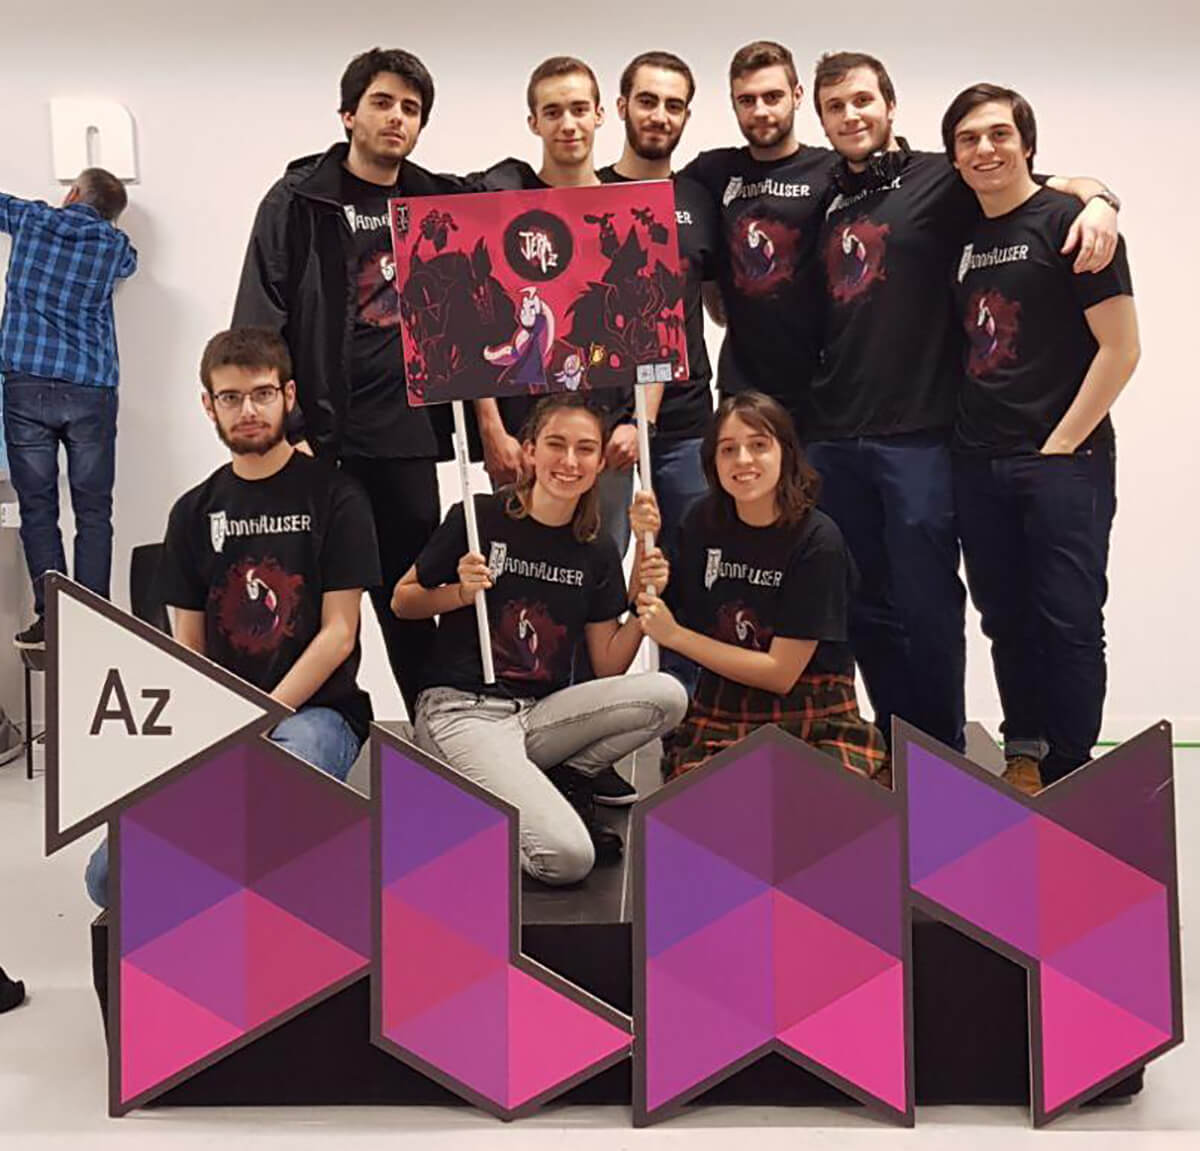 Picture of Team Tannhauser holding a Jera flag in front of an AzPlay sign